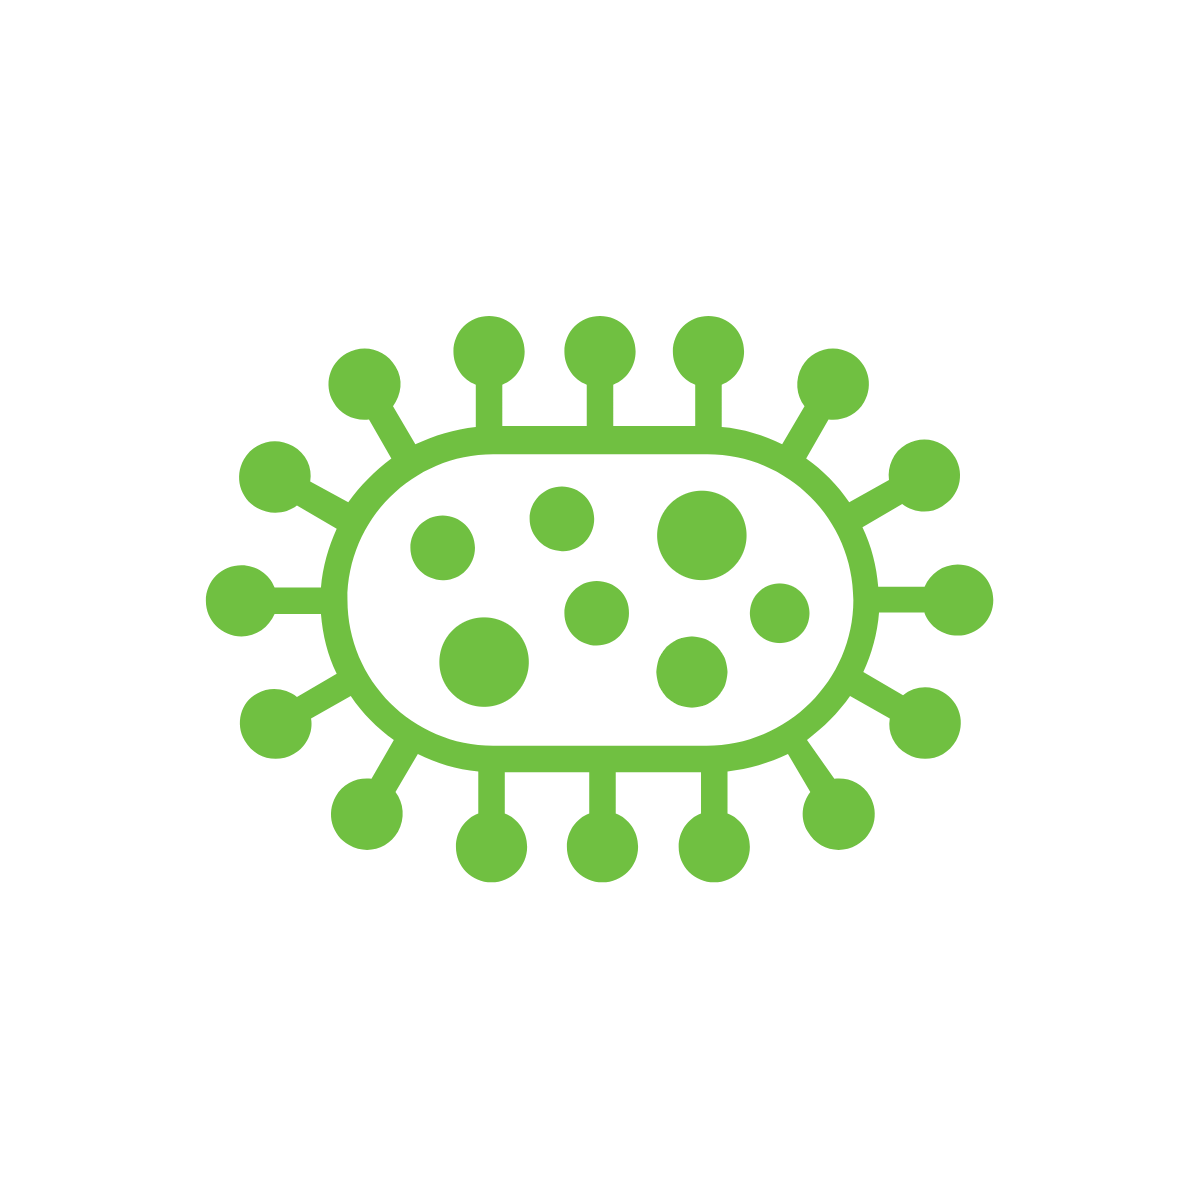 Green microbe graphic with spots inside cell.  Microbe Image By Adrien Coquet, FR